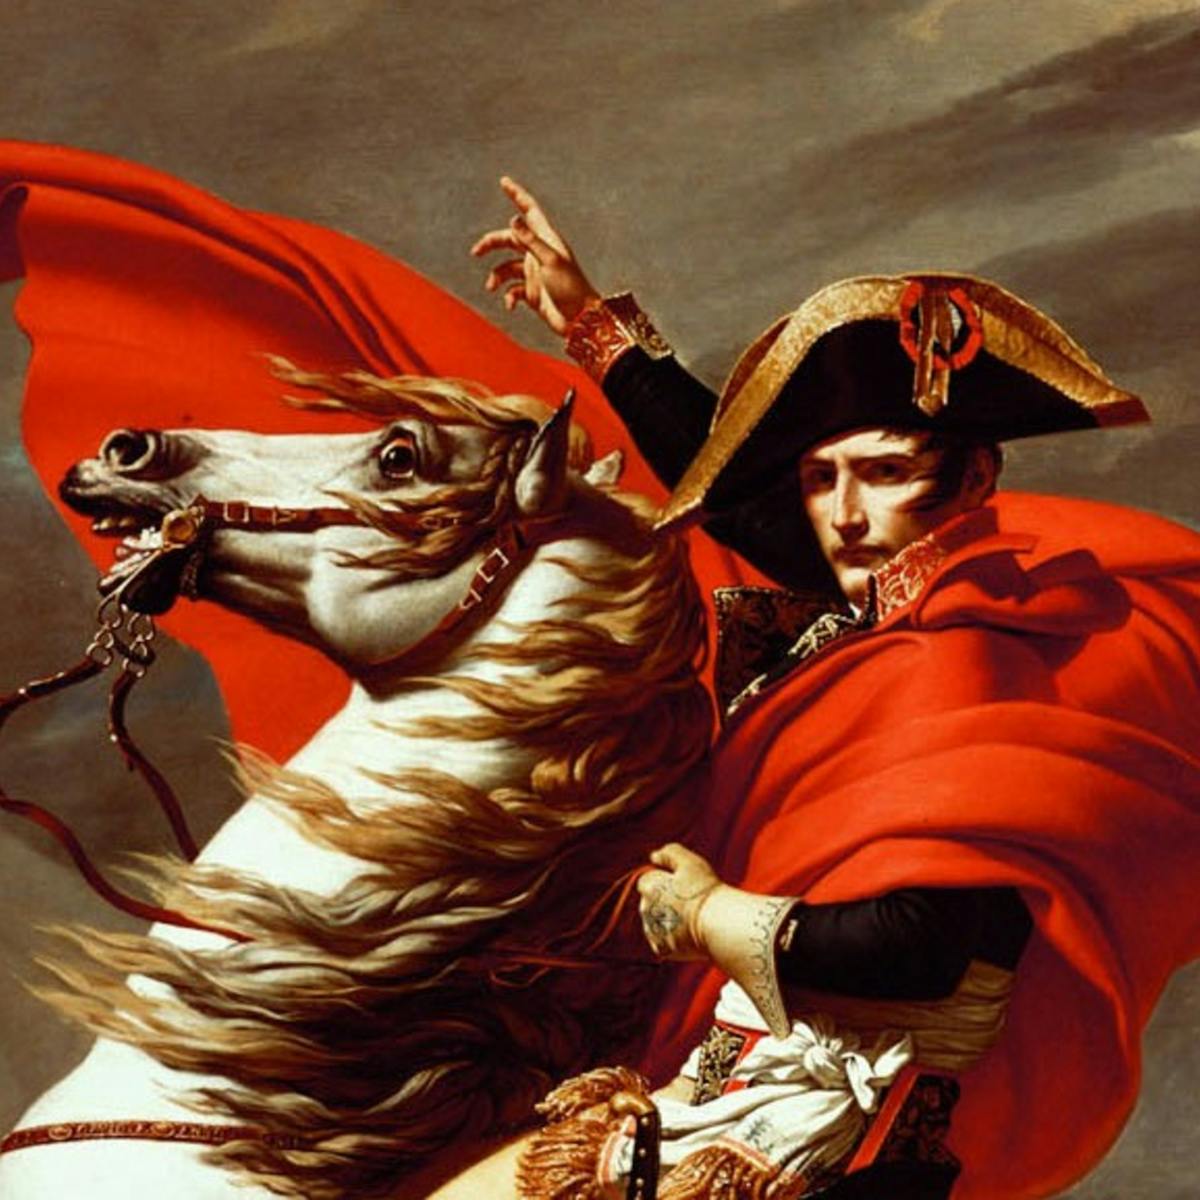 A military man in a red cloak sits astride a white horse, which is rearing up.